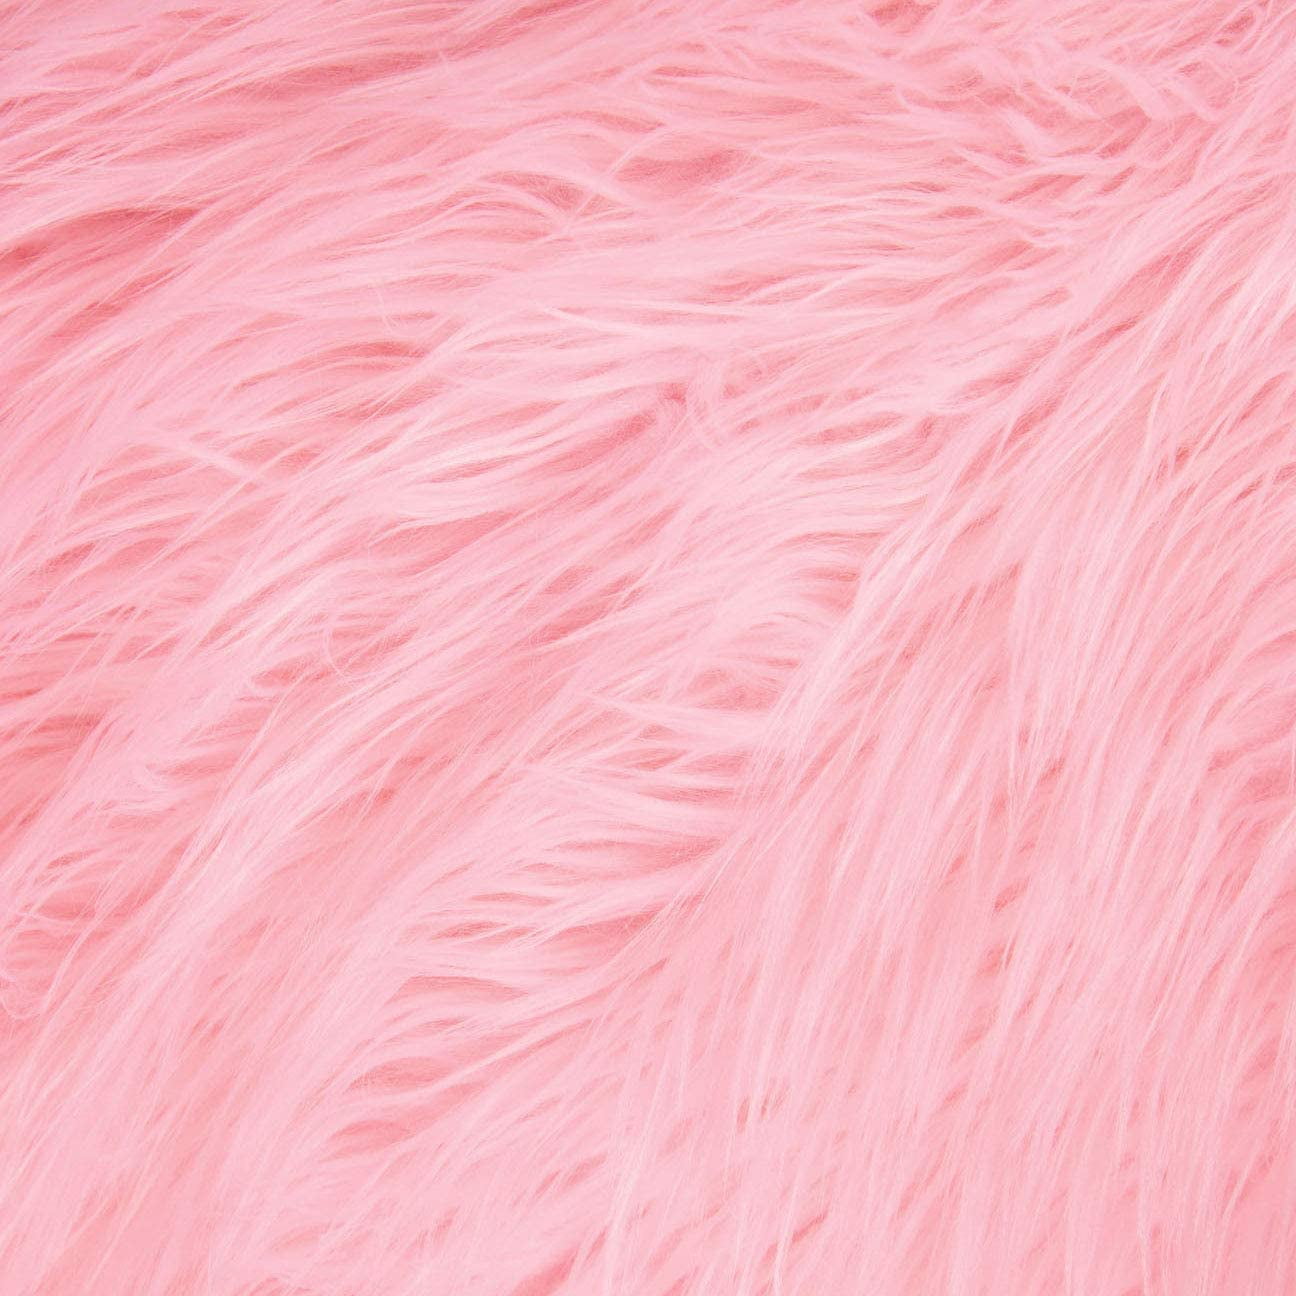  Faux Fur Fabric Square Patches for Crafts, Sewing, Costumes,  Seat Pads (Hot Pink, 10 x 20 Inch)